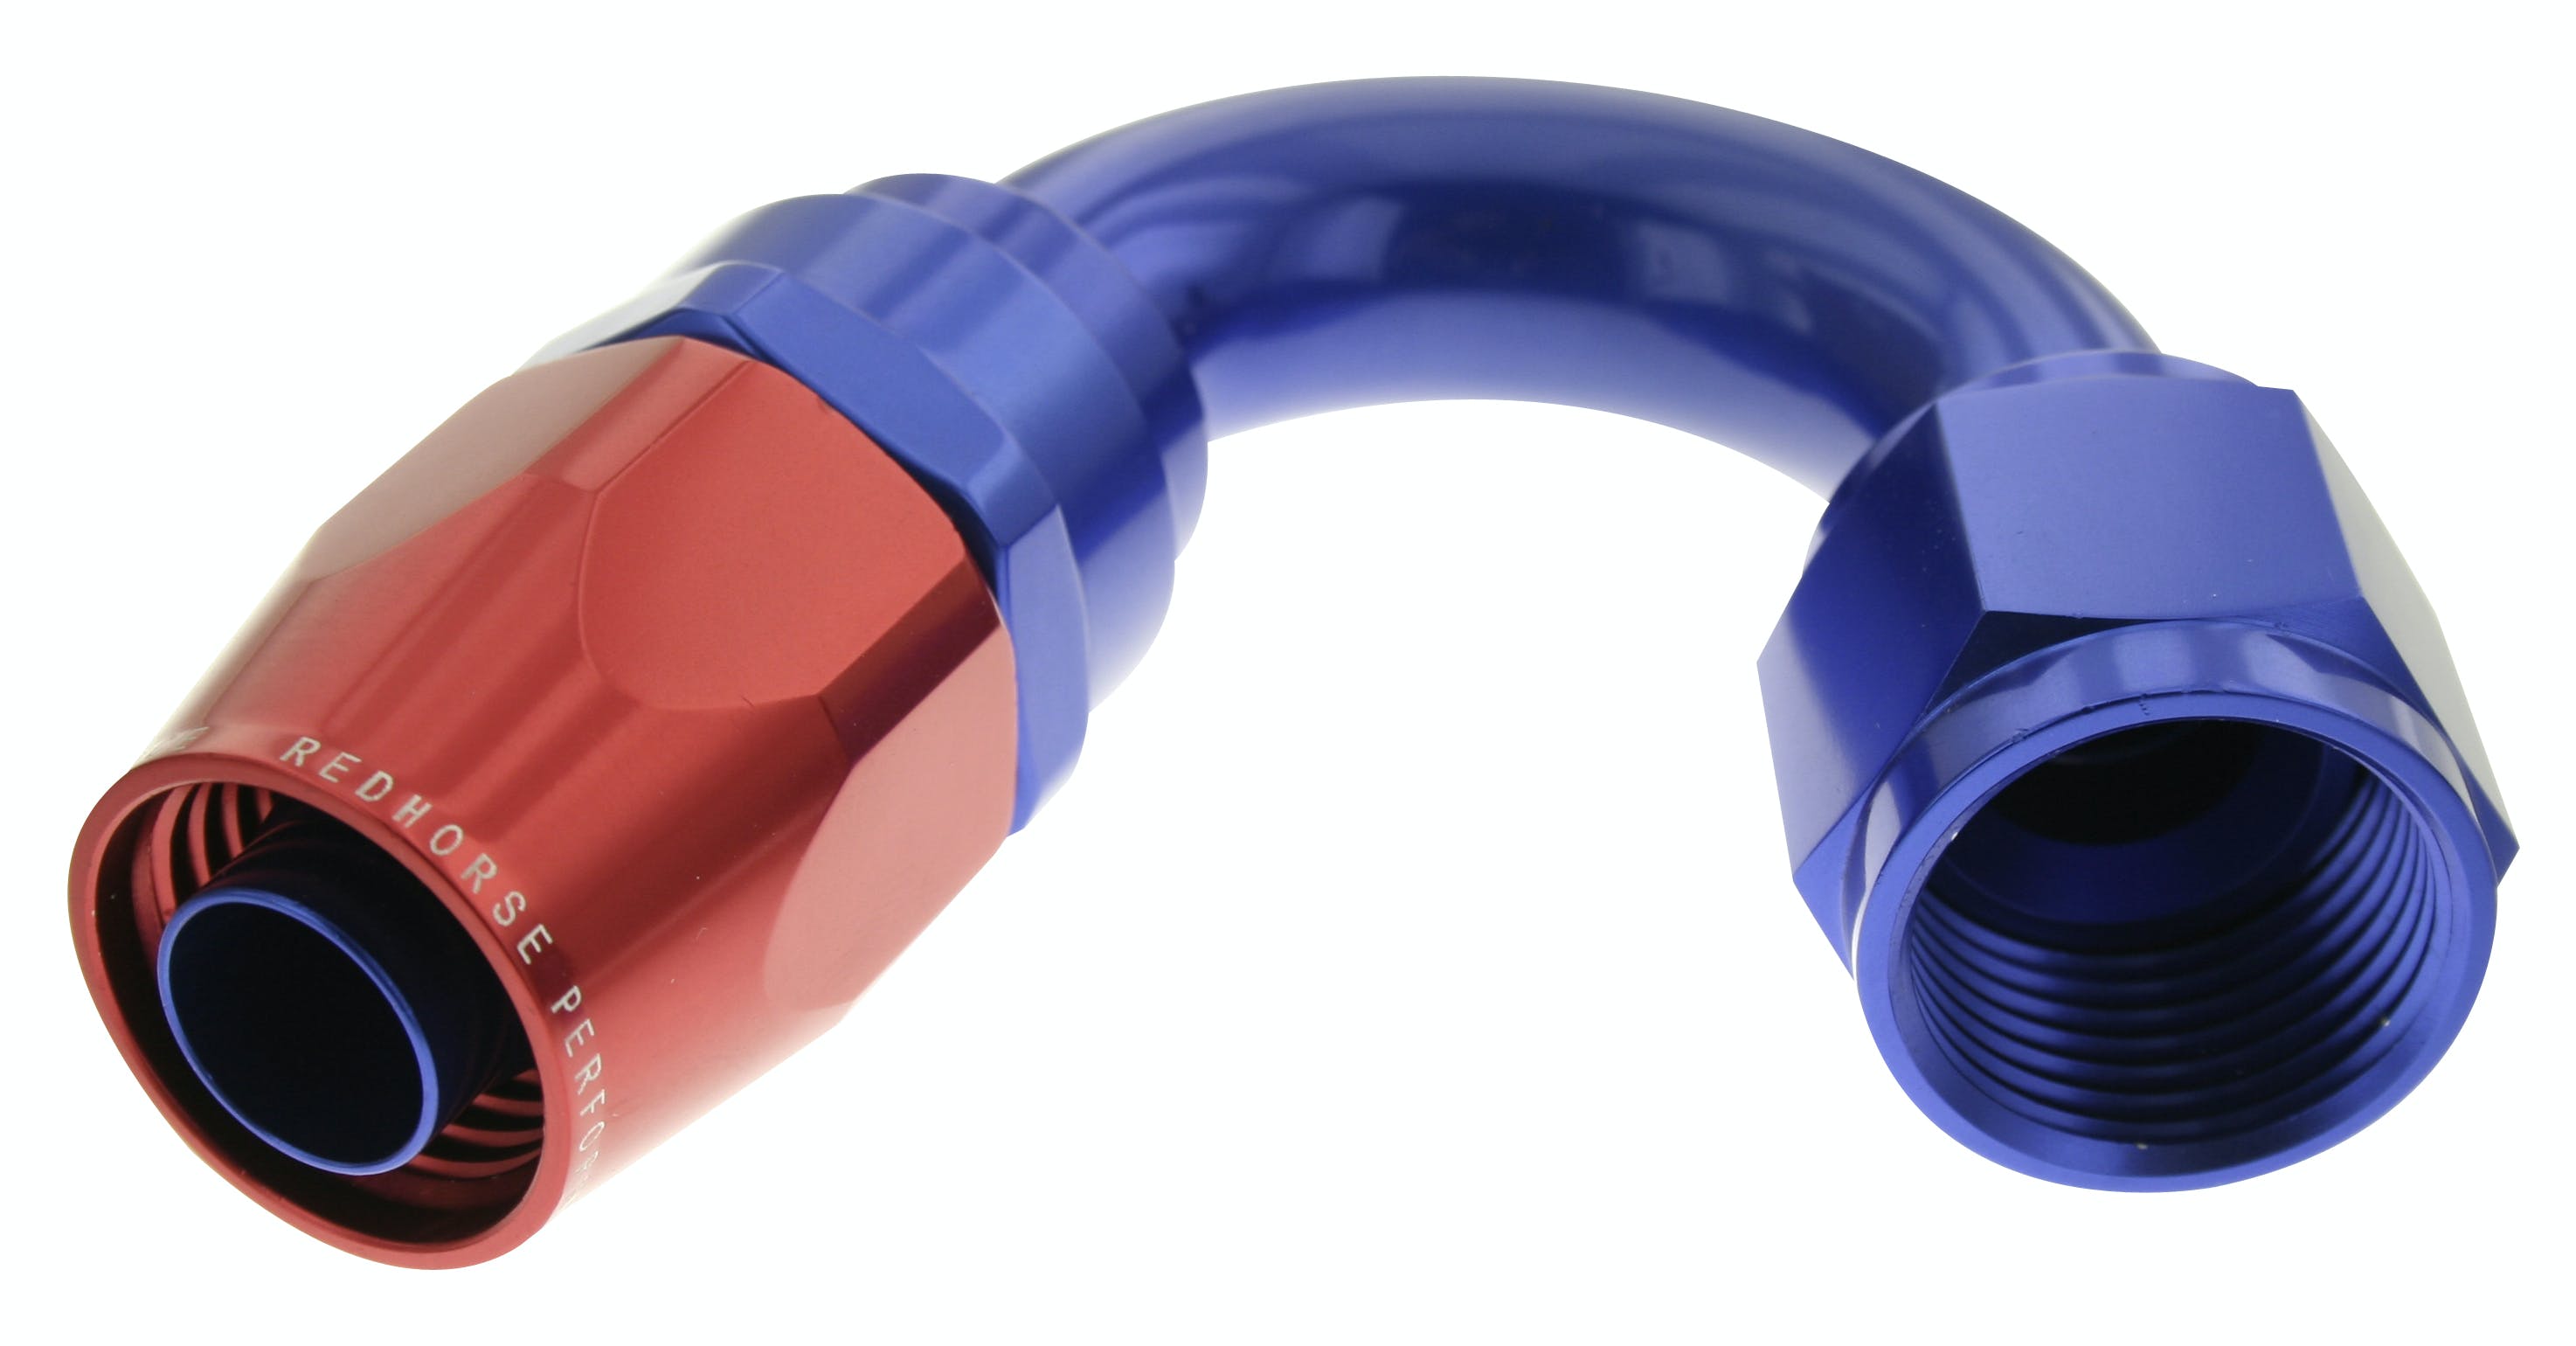 Redhorse Performance 1150-12-1 -12 150 degree Female Aluminum Hose End - red and blue